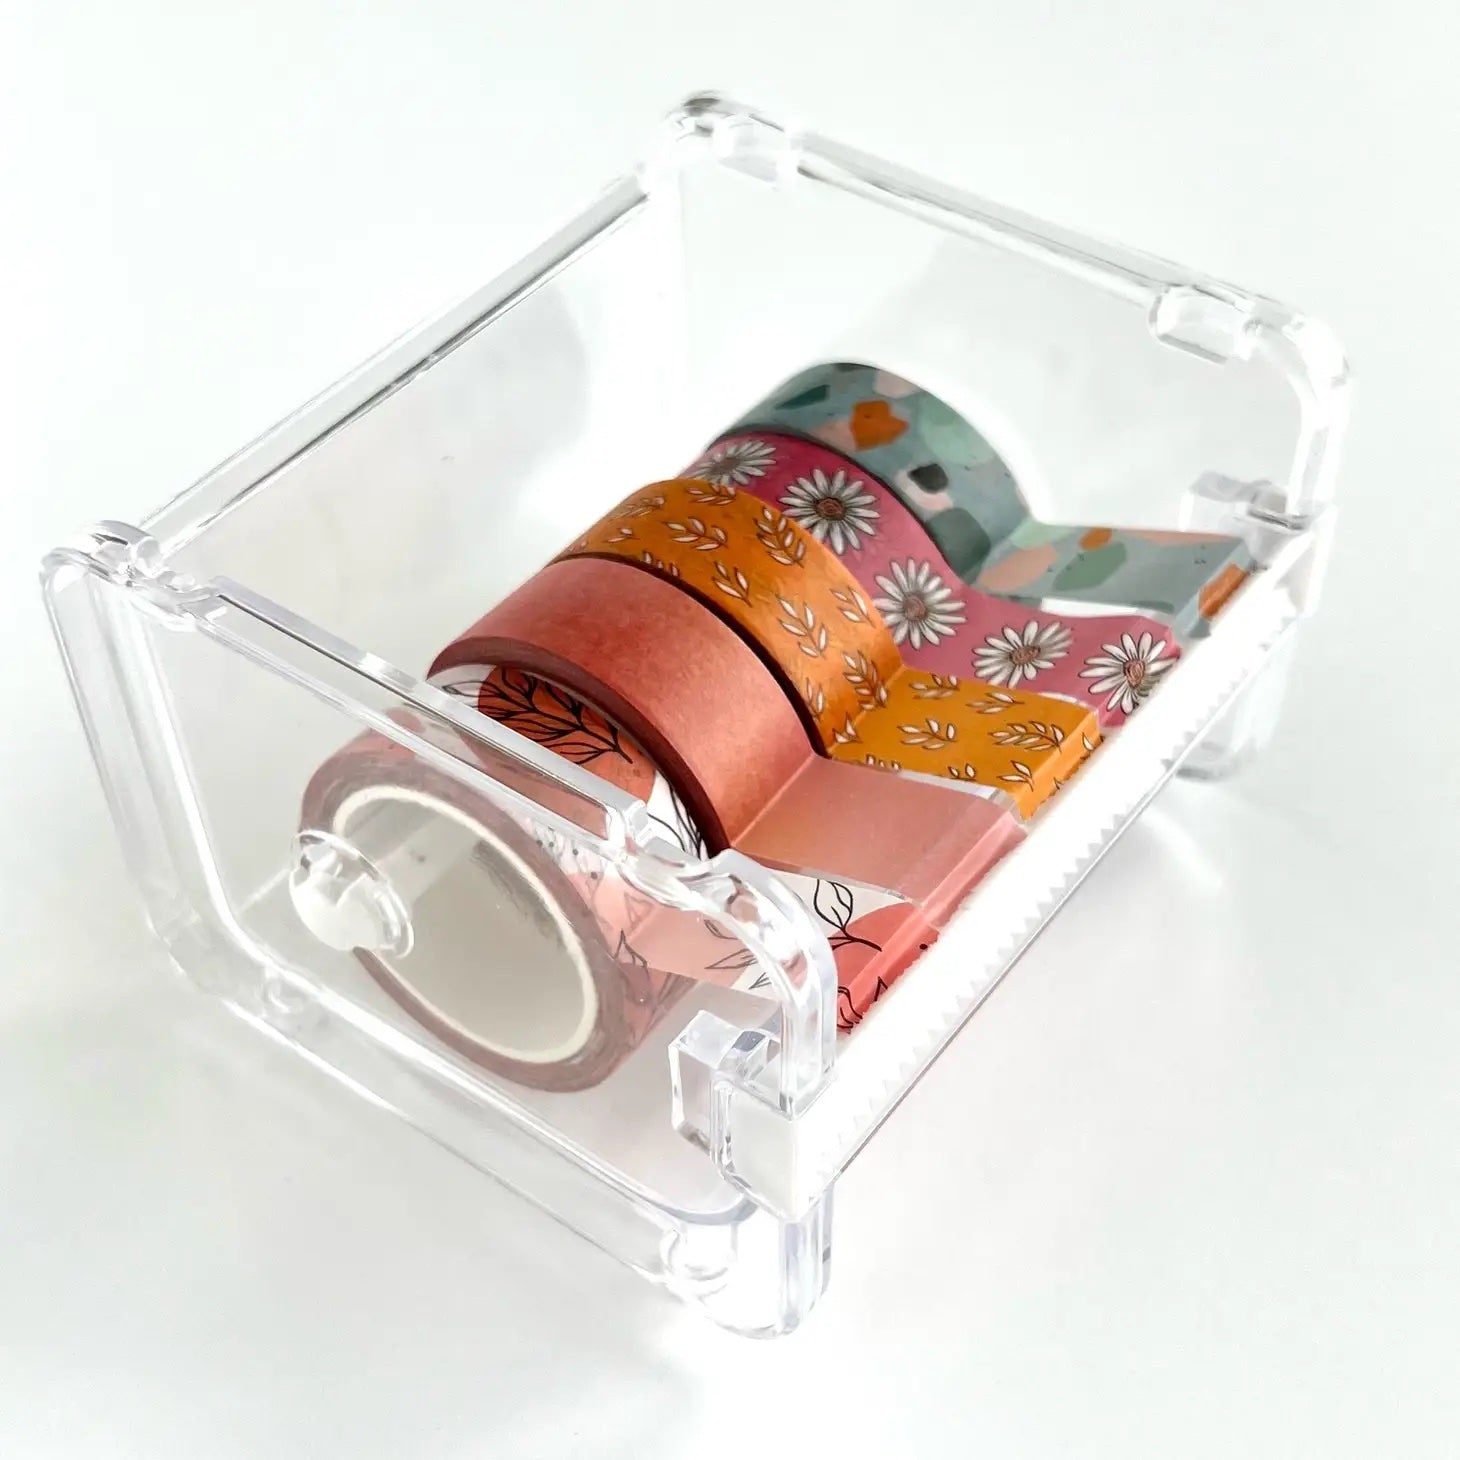 Portable Washi Tape Dispenser Paper Roll Holder (Washi Tape not included)